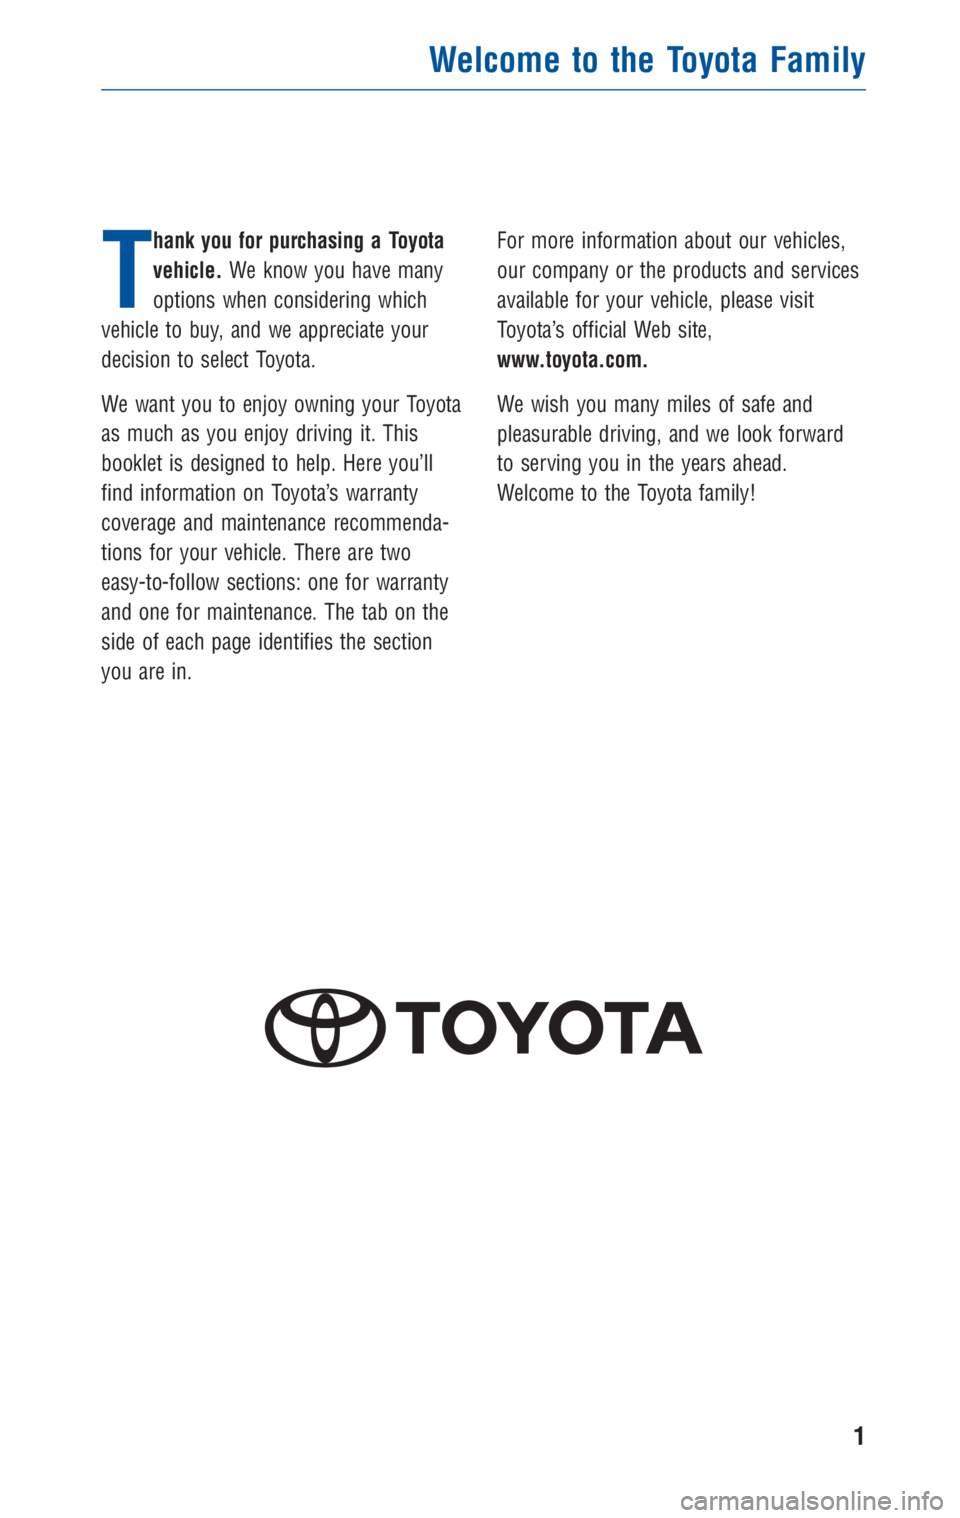 TOYOTA VENZA 2010  Warranties & Maintenance Guides (in English) T
hank you for purchasing a Toyota
vehicle.We know you have many
options when considering which
vehicle to buy, and we appreciate your
decision to select Toyota.
We want you to enjoy owning your Toyot